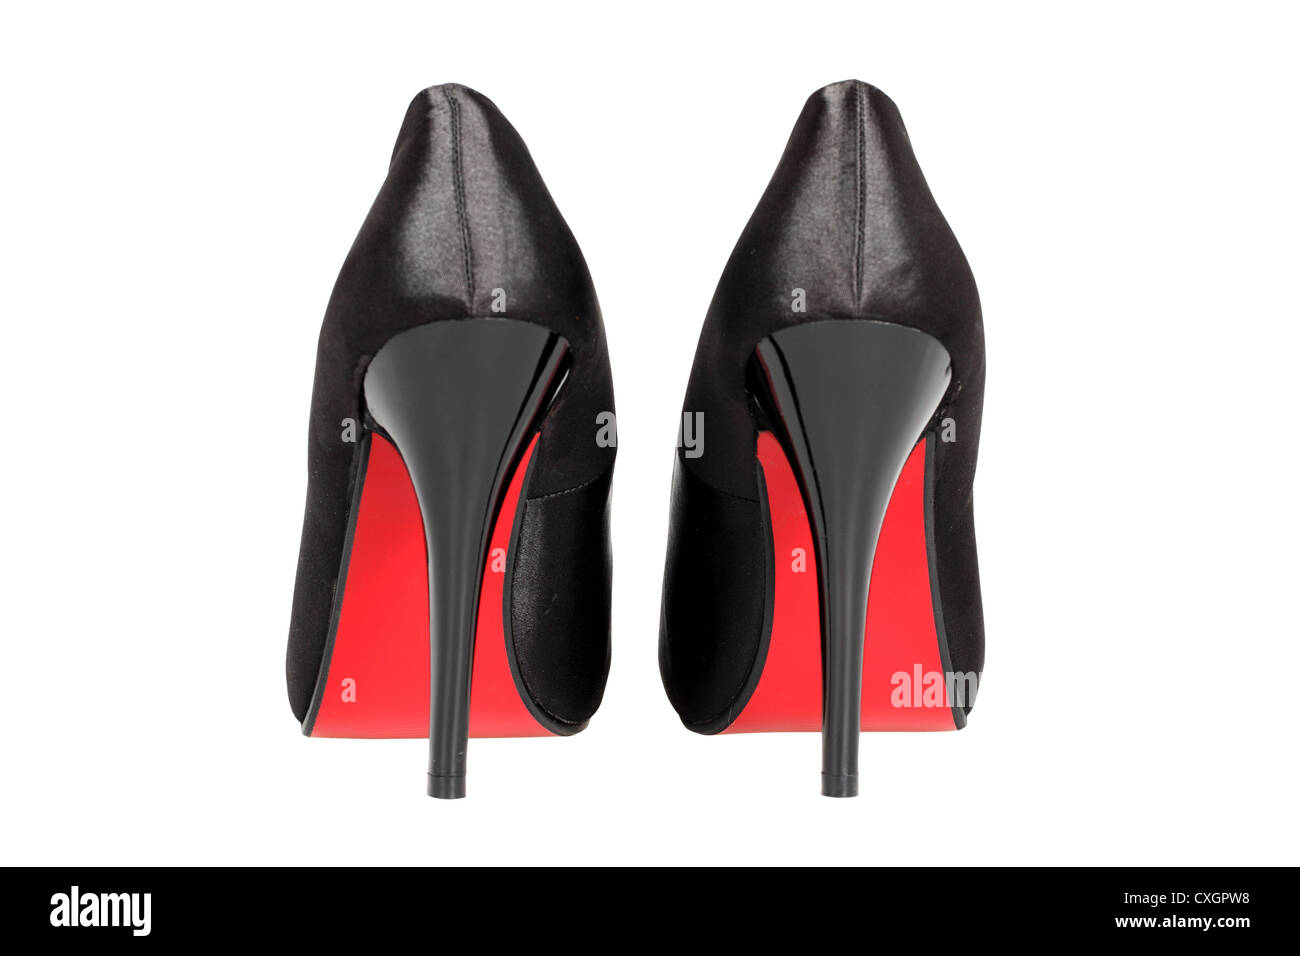 Premium Photo  Black women's shoes with red soles. 3d rendering